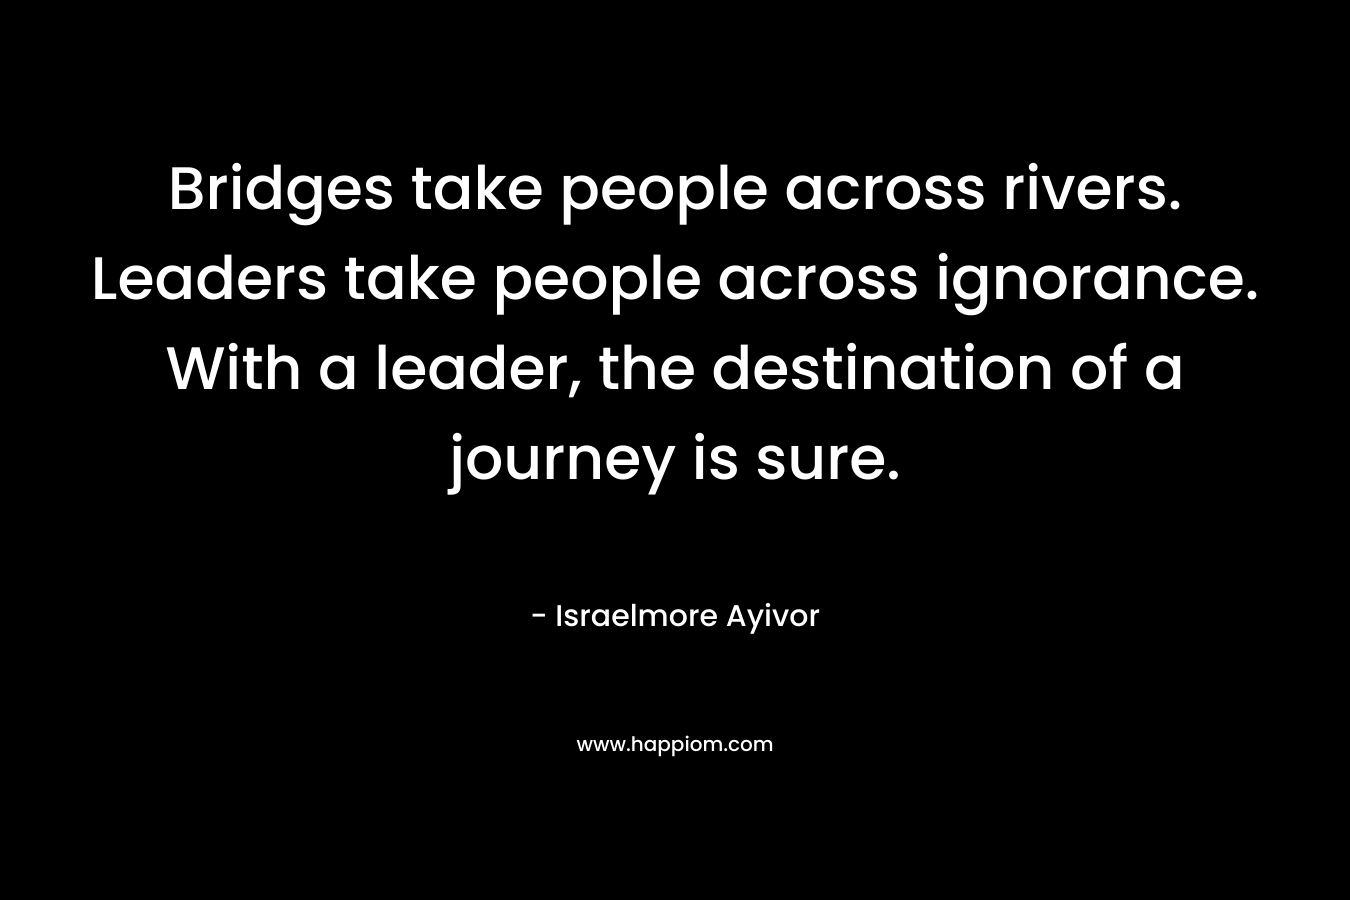 Bridges take people across rivers. Leaders take people across ignorance. With a leader, the destination of a journey is sure.